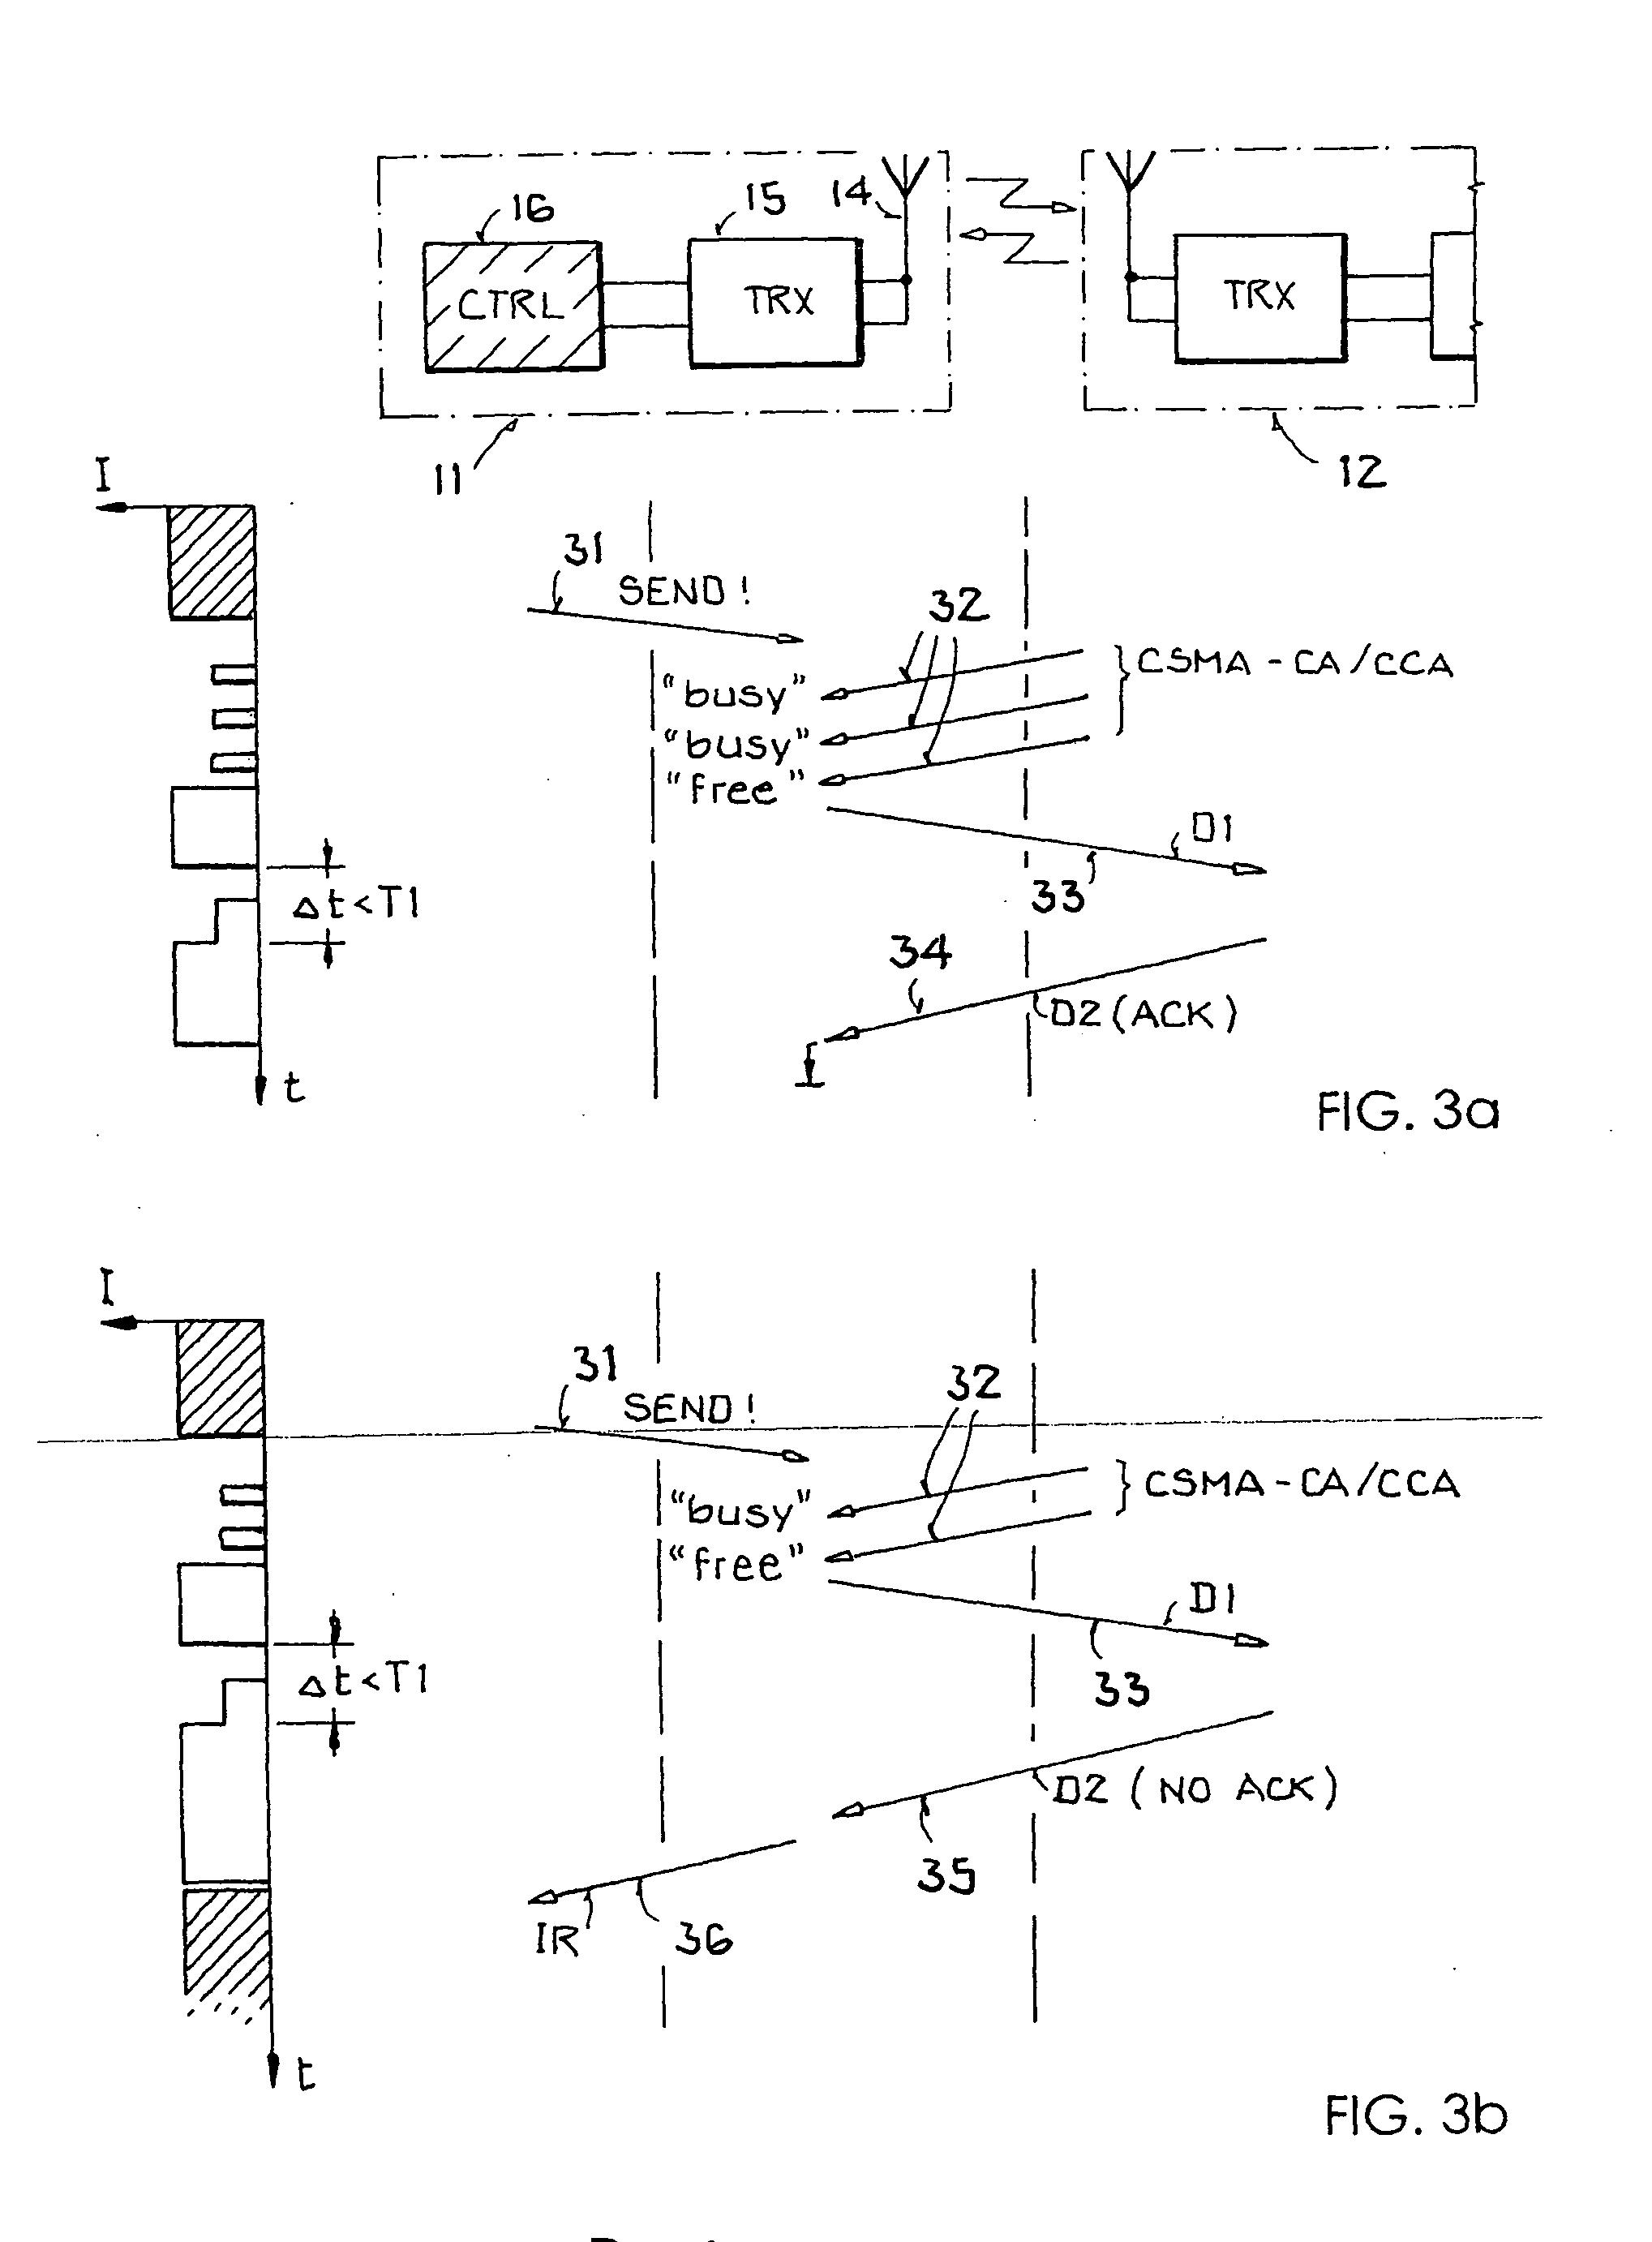 Device for transmitting and receiving